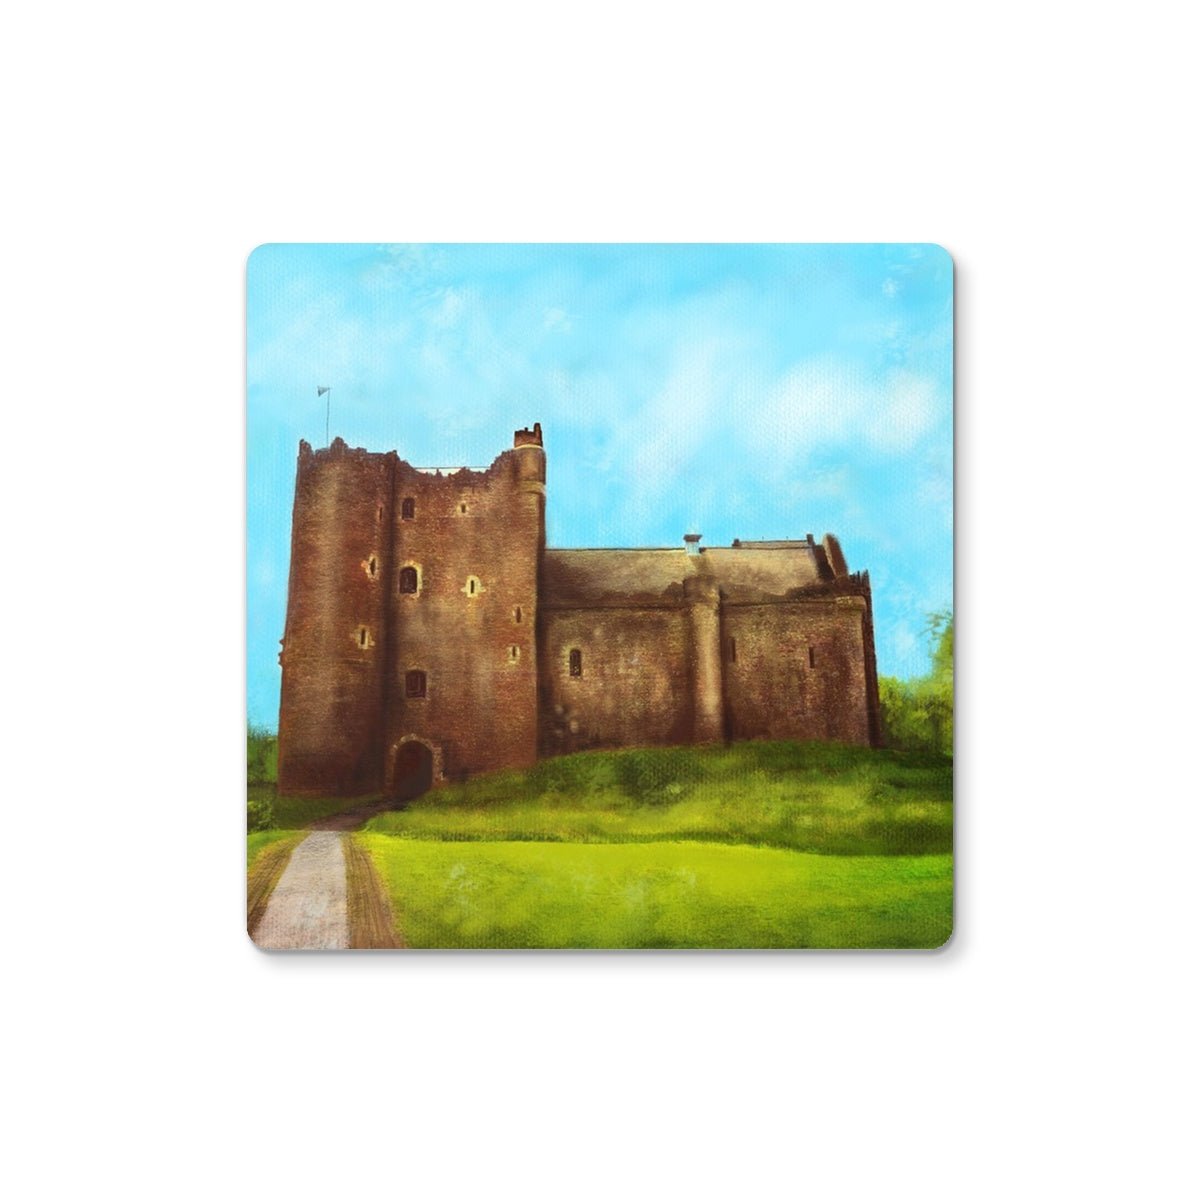 Doune Castle Art Gifts Coaster-Coasters-Historic & Iconic Scotland Art Gallery-Single Coaster-Paintings, Prints, Homeware, Art Gifts From Scotland By Scottish Artist Kevin Hunter